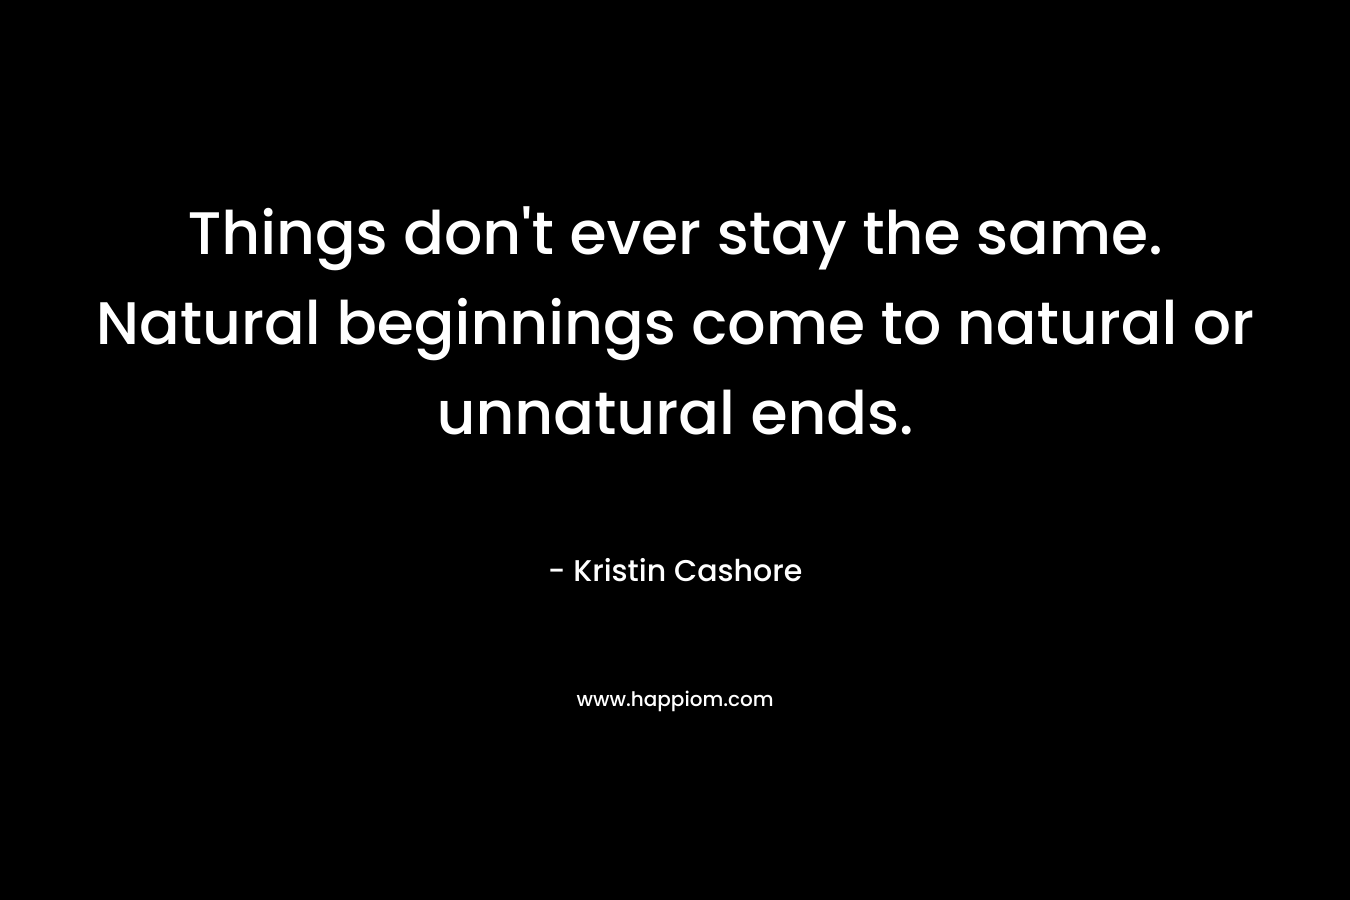 Things don’t ever stay the same. Natural beginnings come to natural or unnatural ends. – Kristin Cashore